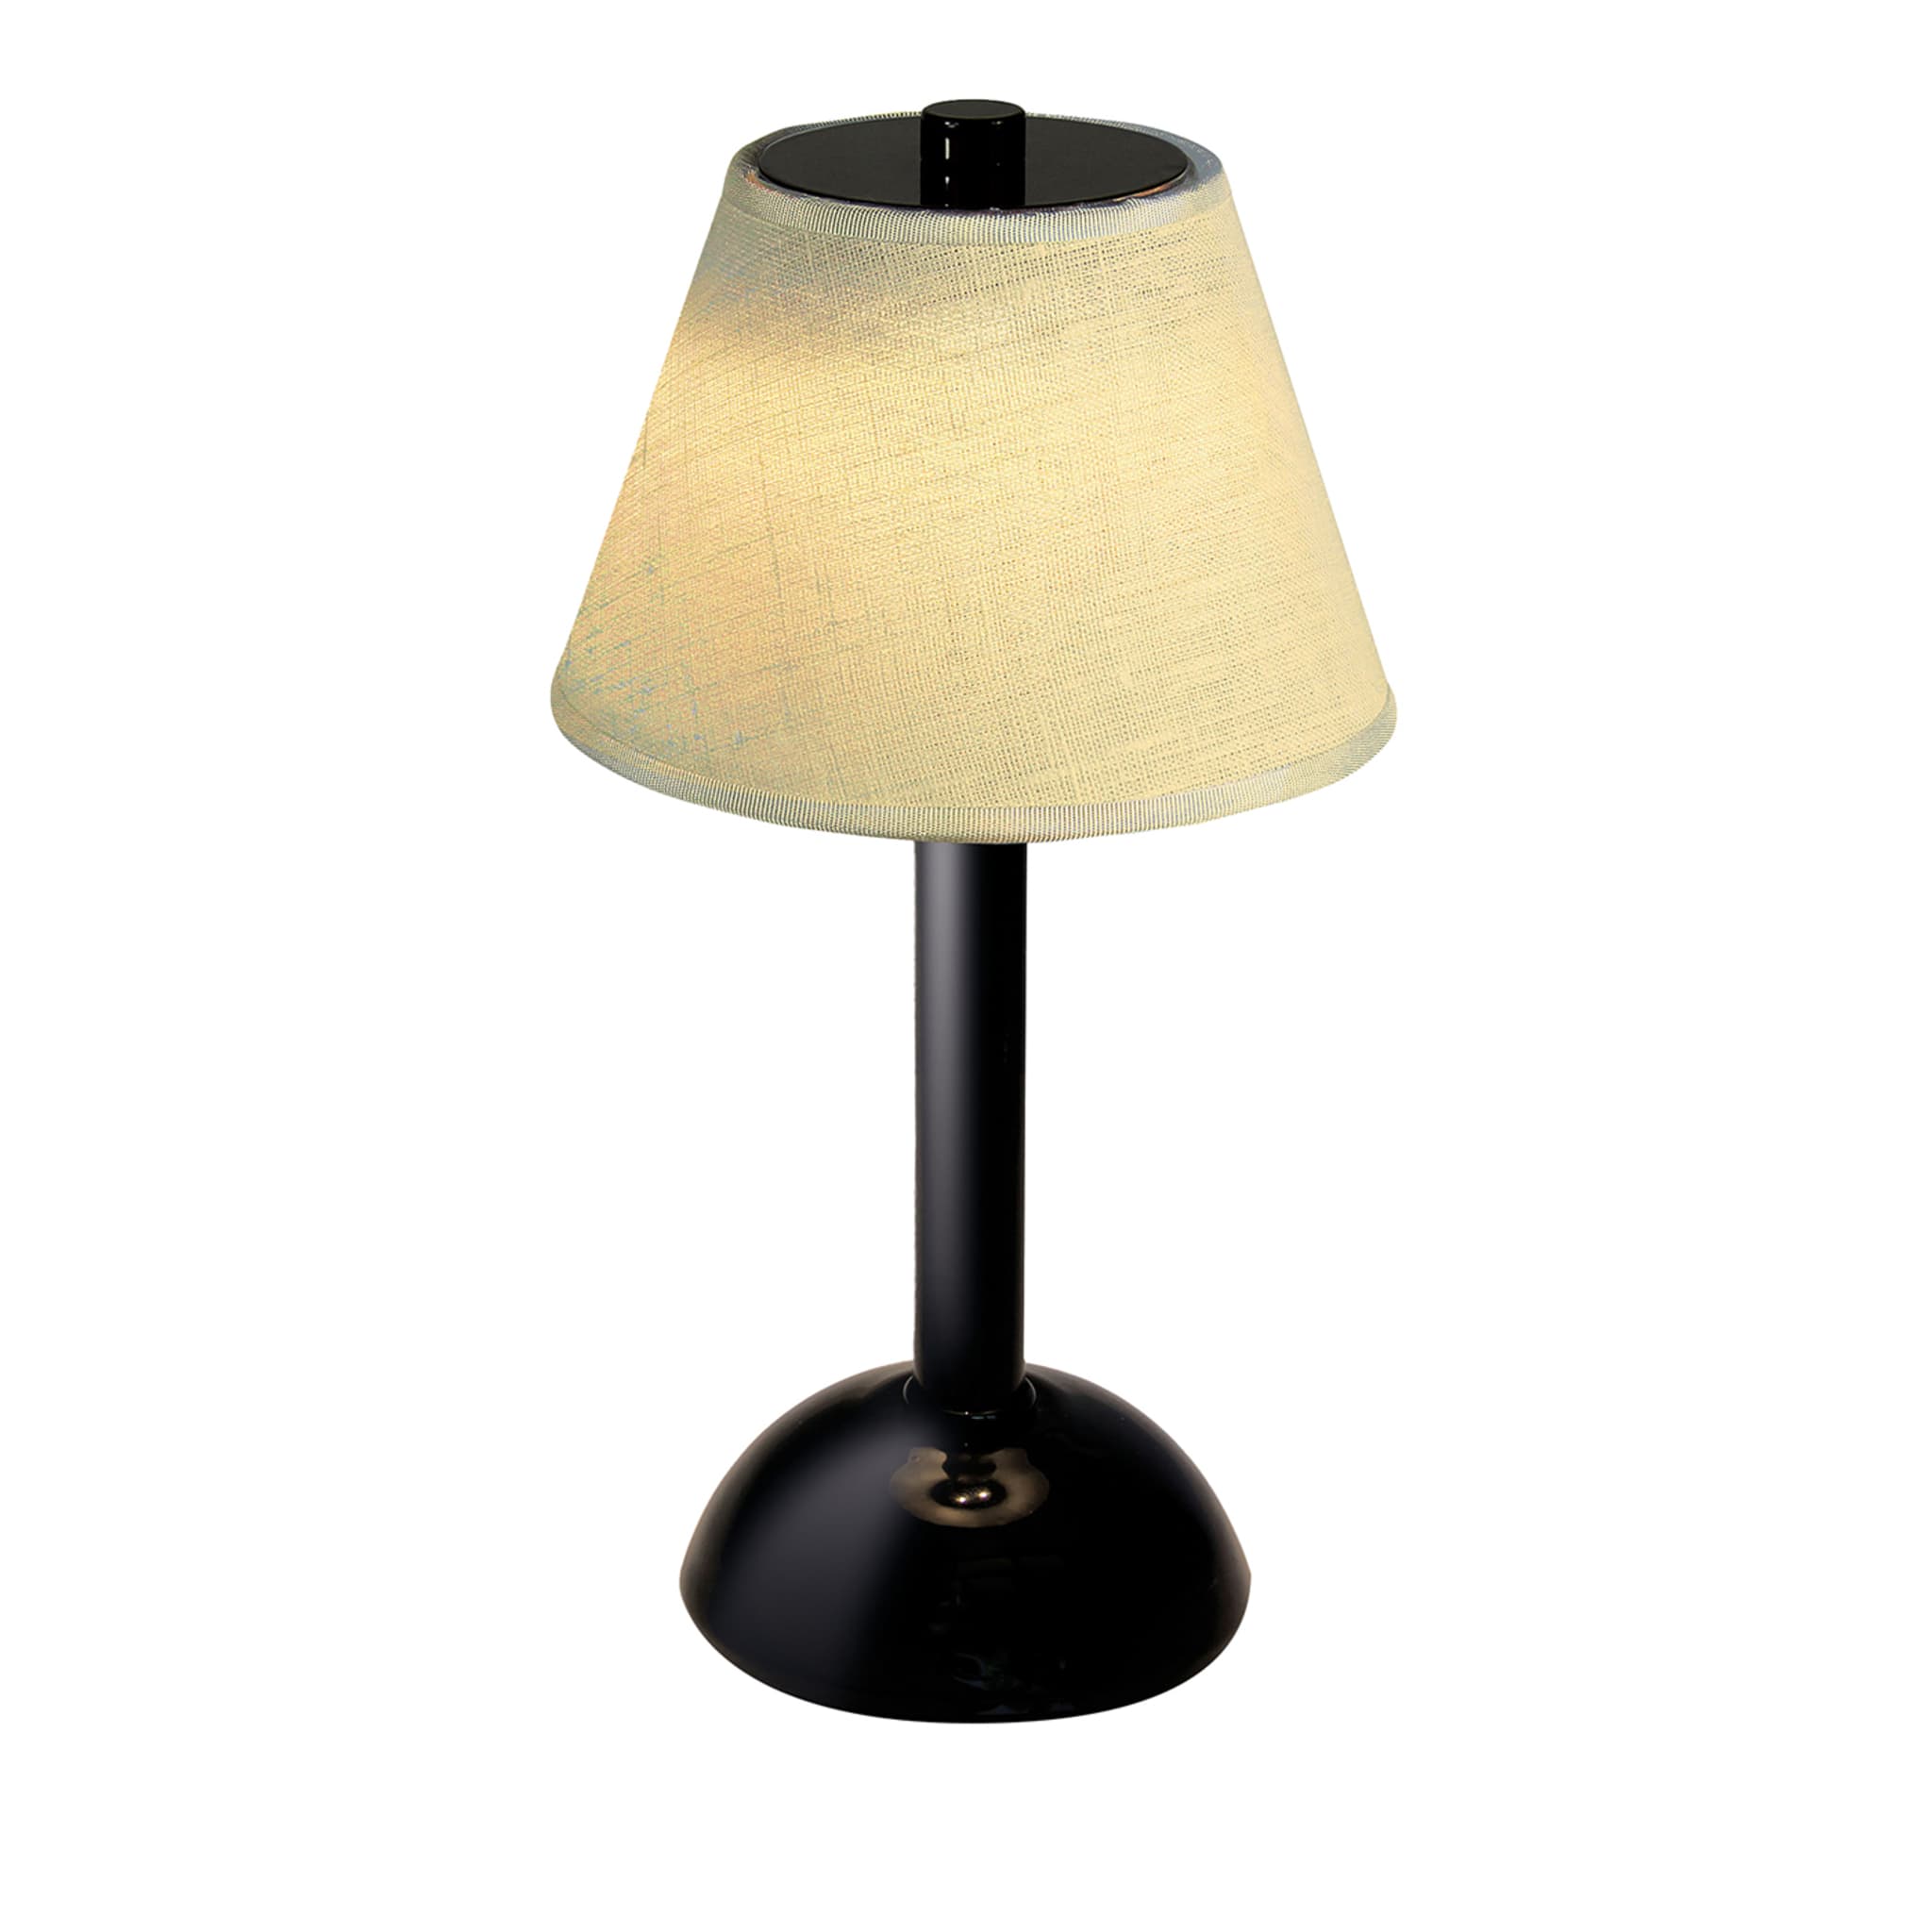 Moon Ivory Linen Black Table Lamp by Stefano Tabarin - Main view